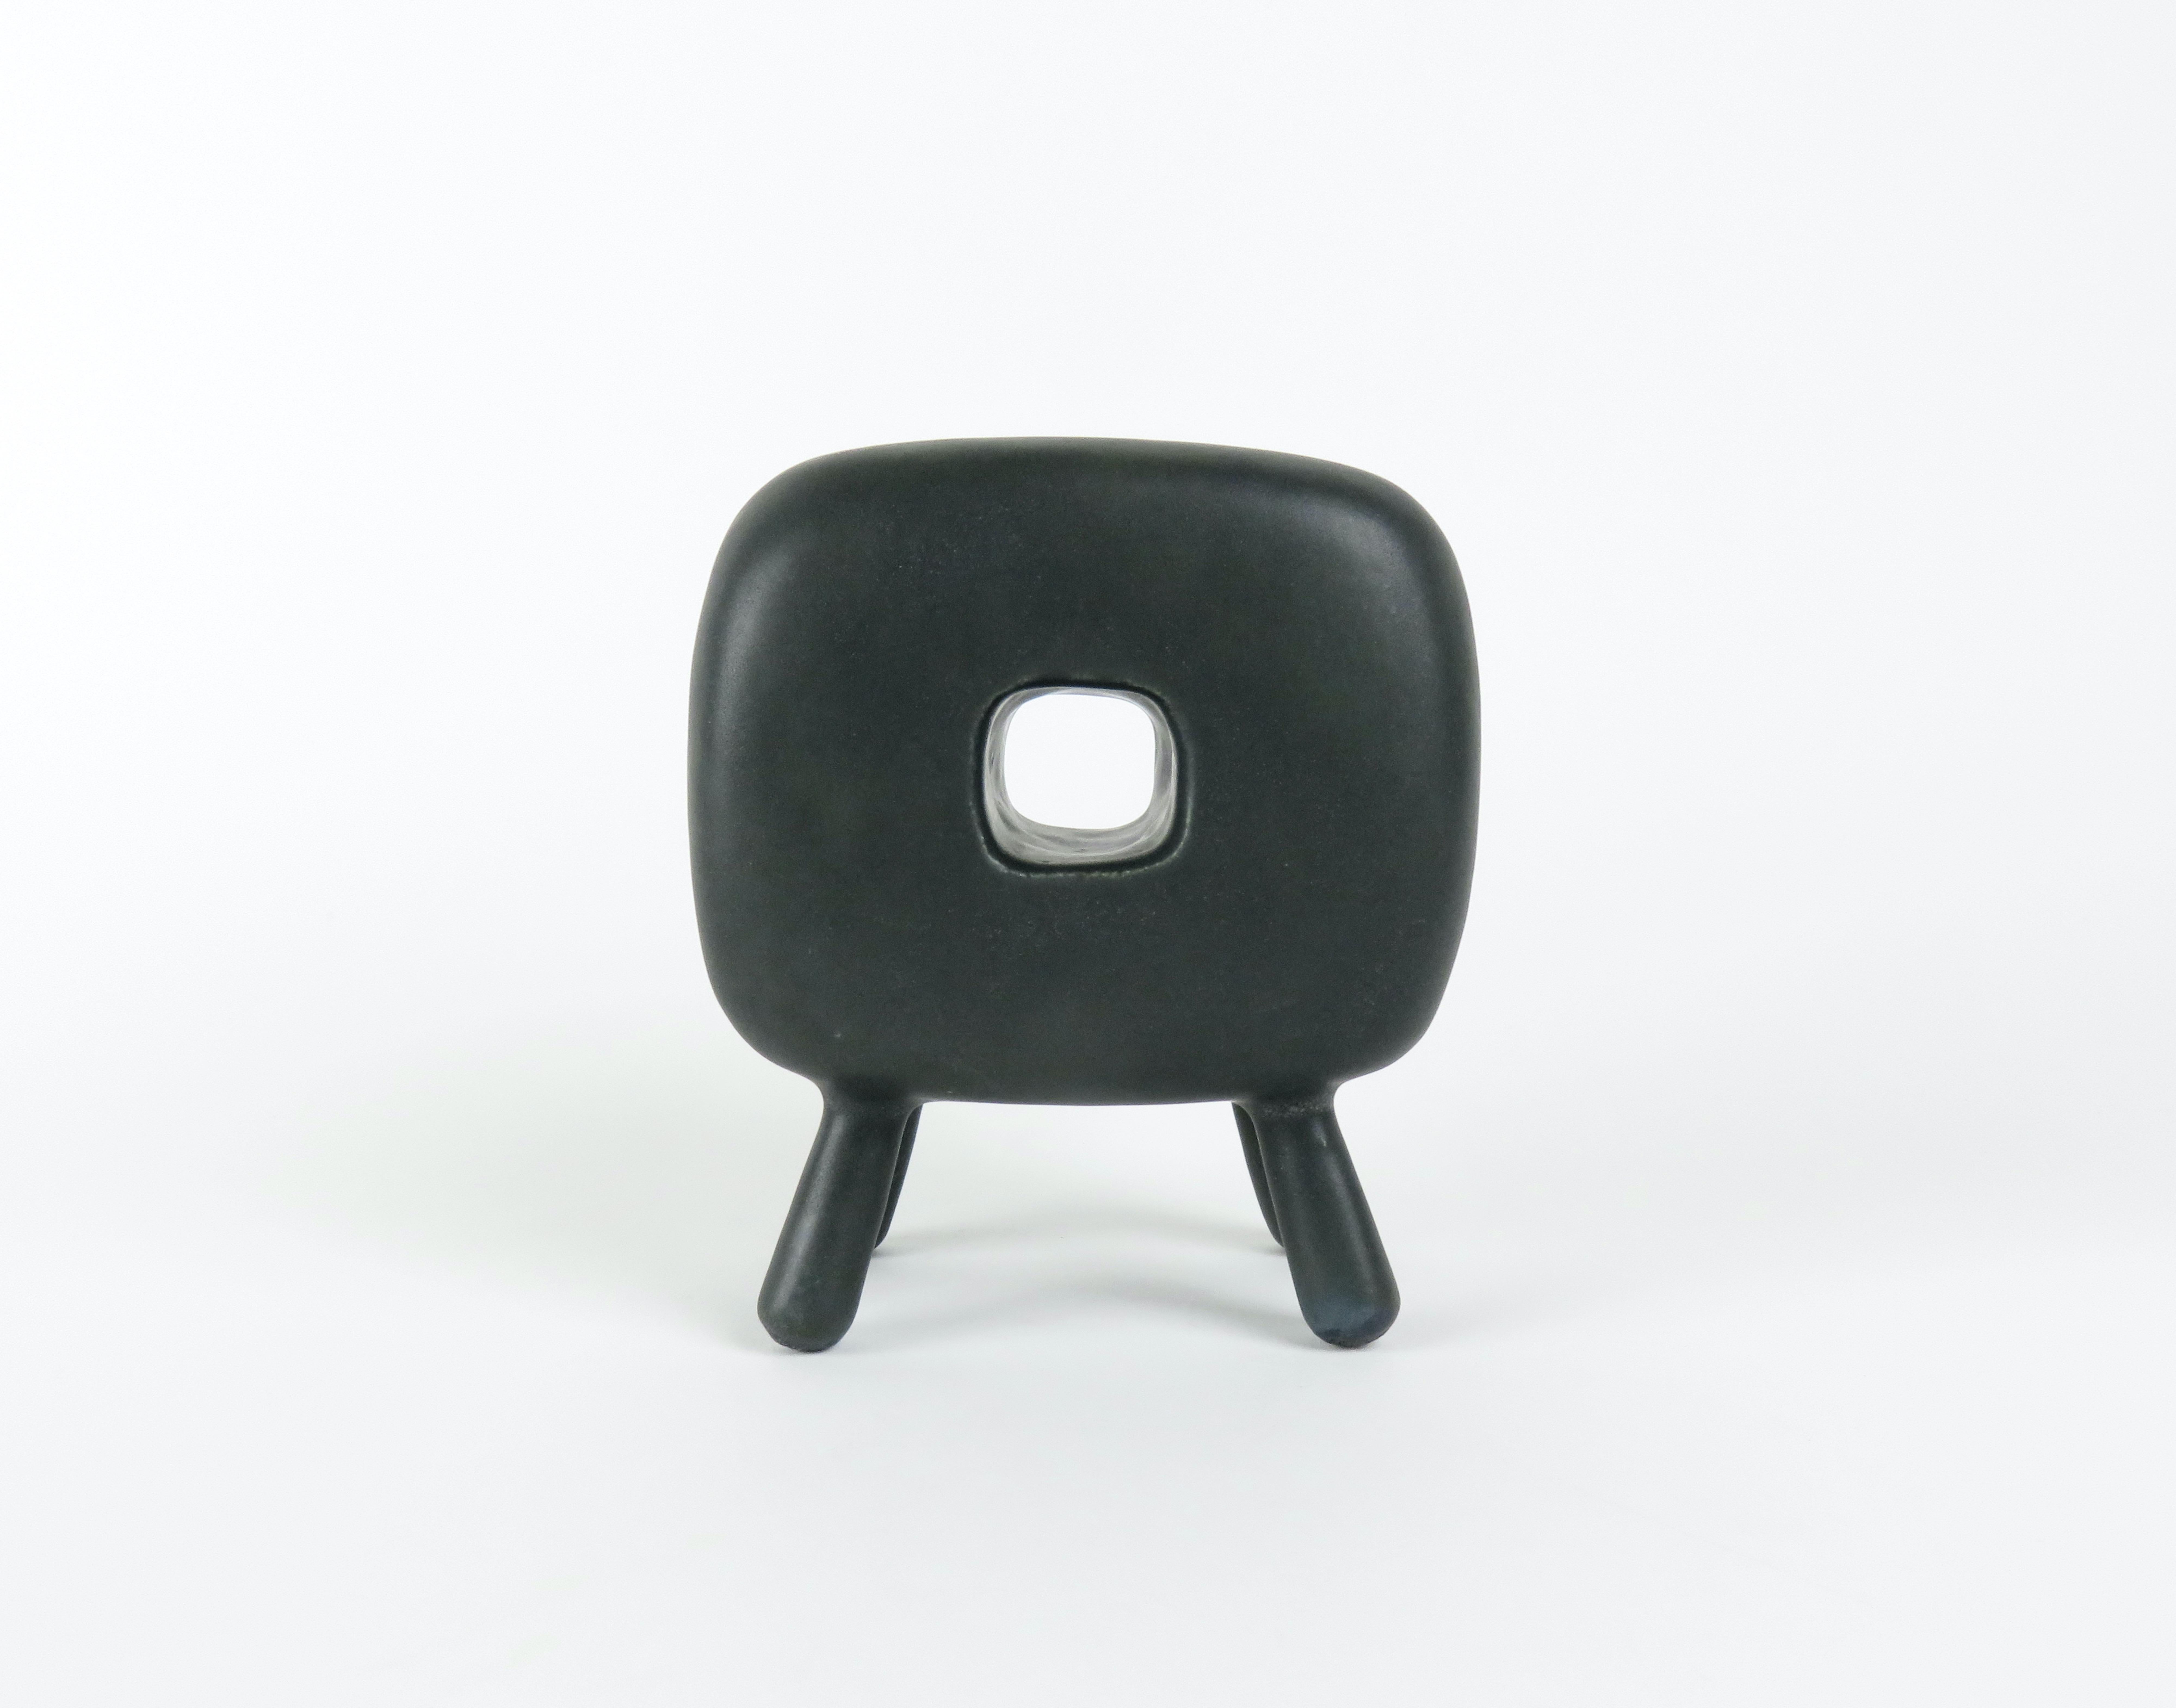 Hand-Crafted Smooth Black Glazed Ceramic Cube with Square Center Opening, 4 Legs, Handbuilt